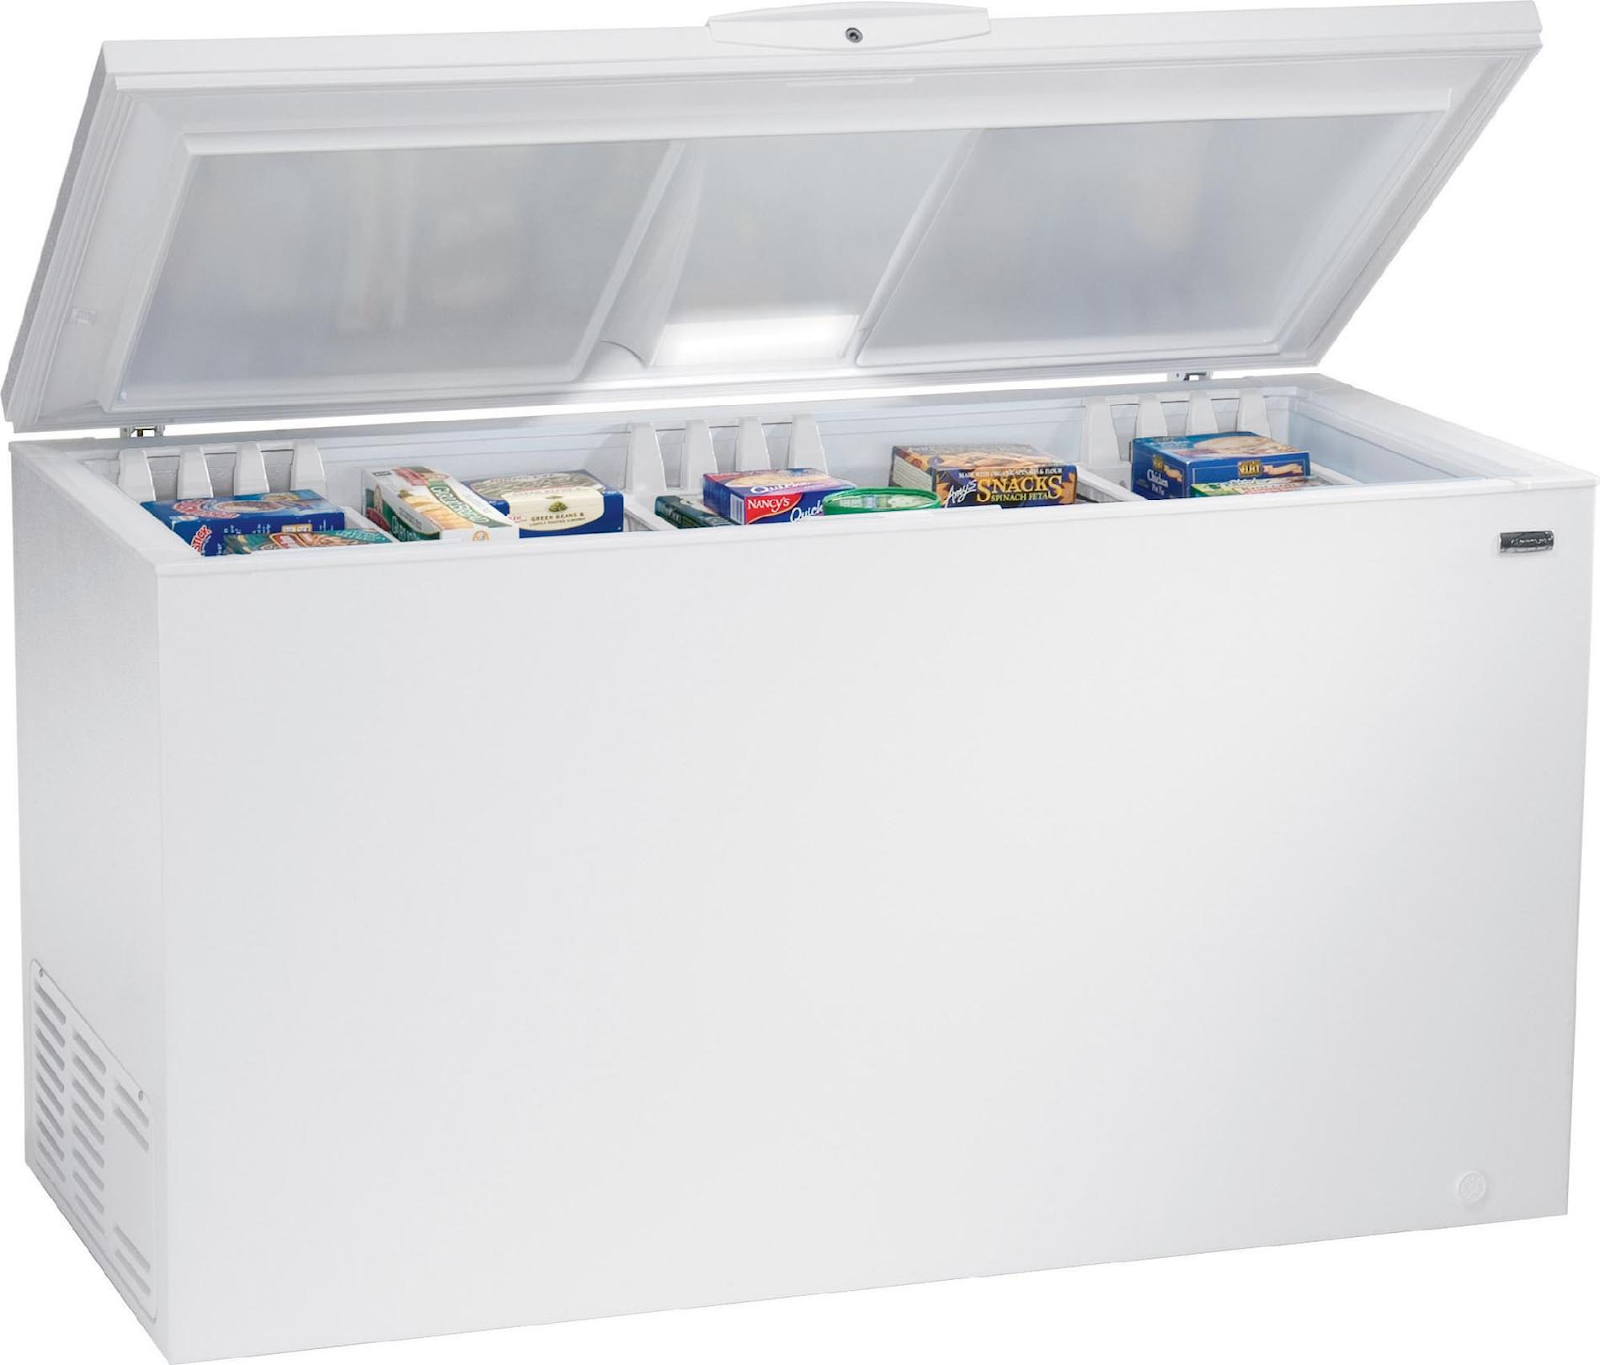 All About Chest Freezer Sizing - Blog Happys Appliances